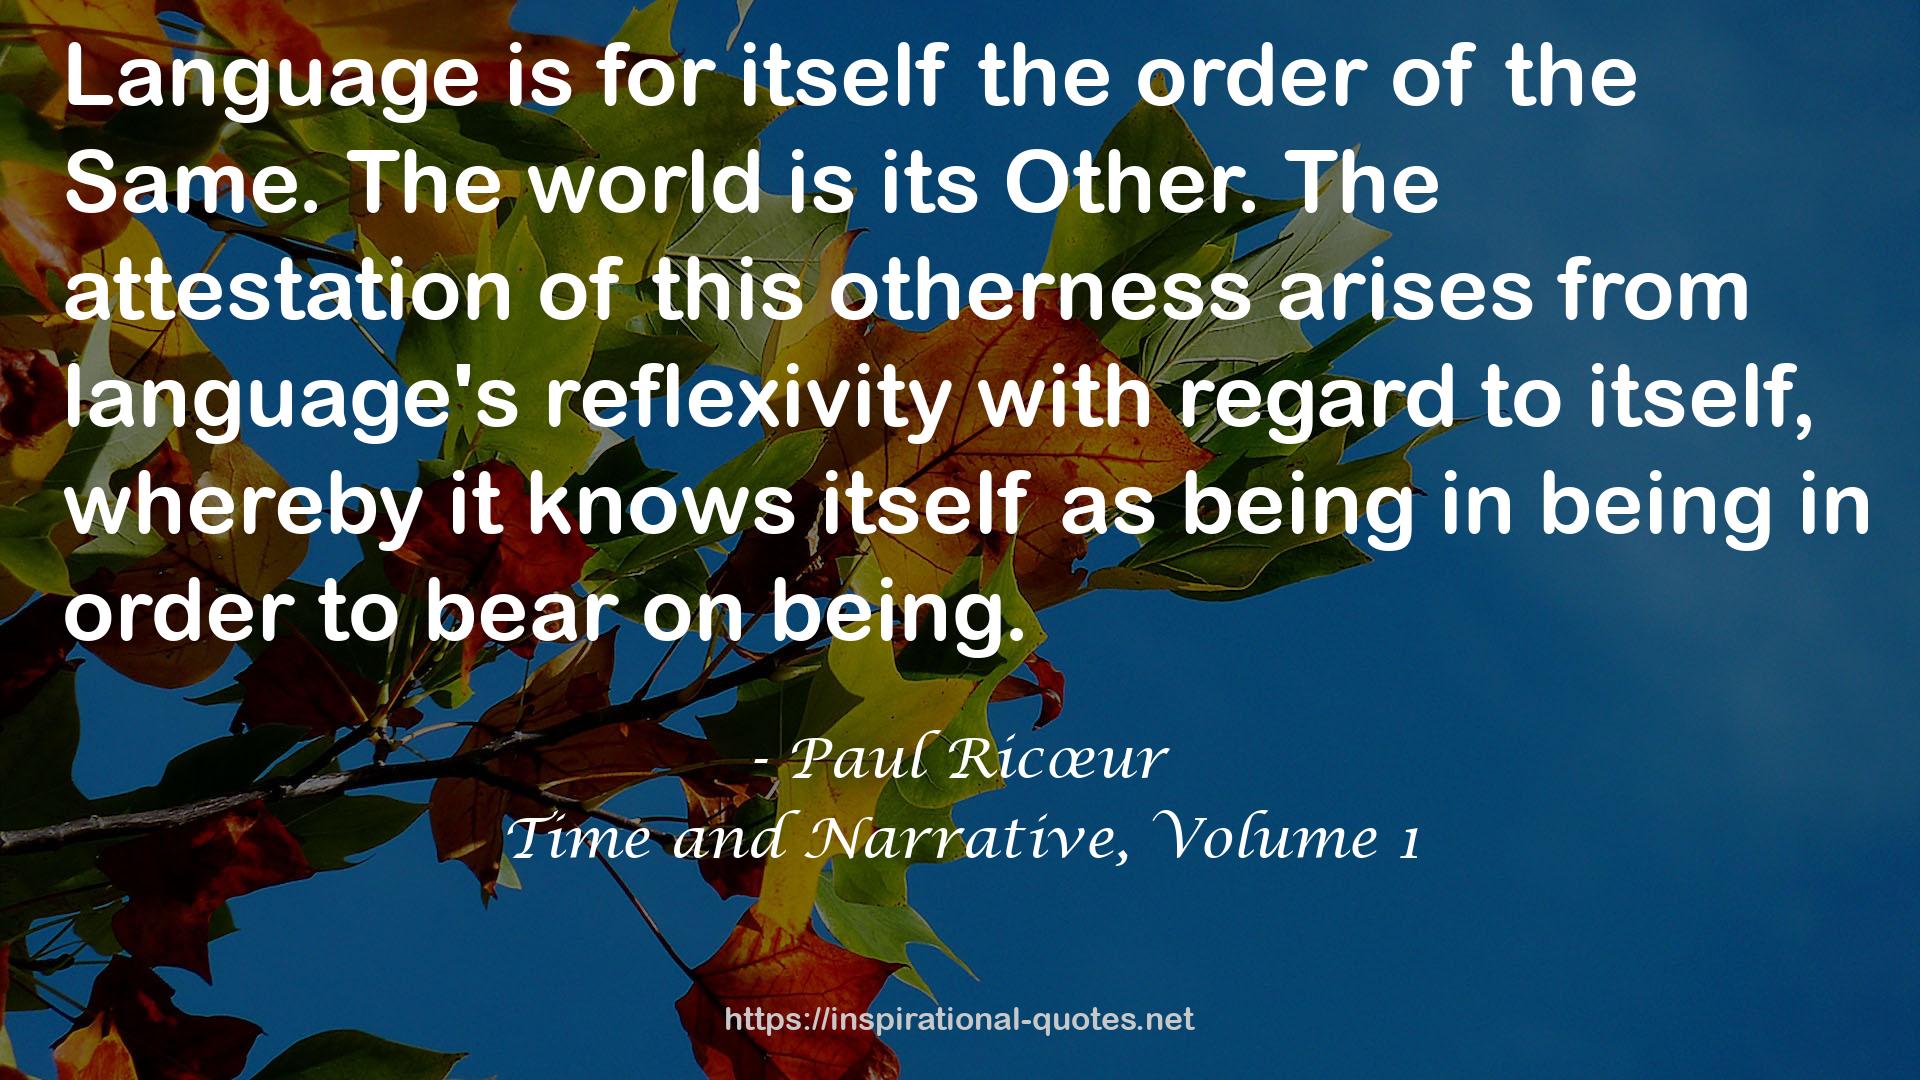 Time and Narrative, Volume 1 QUOTES